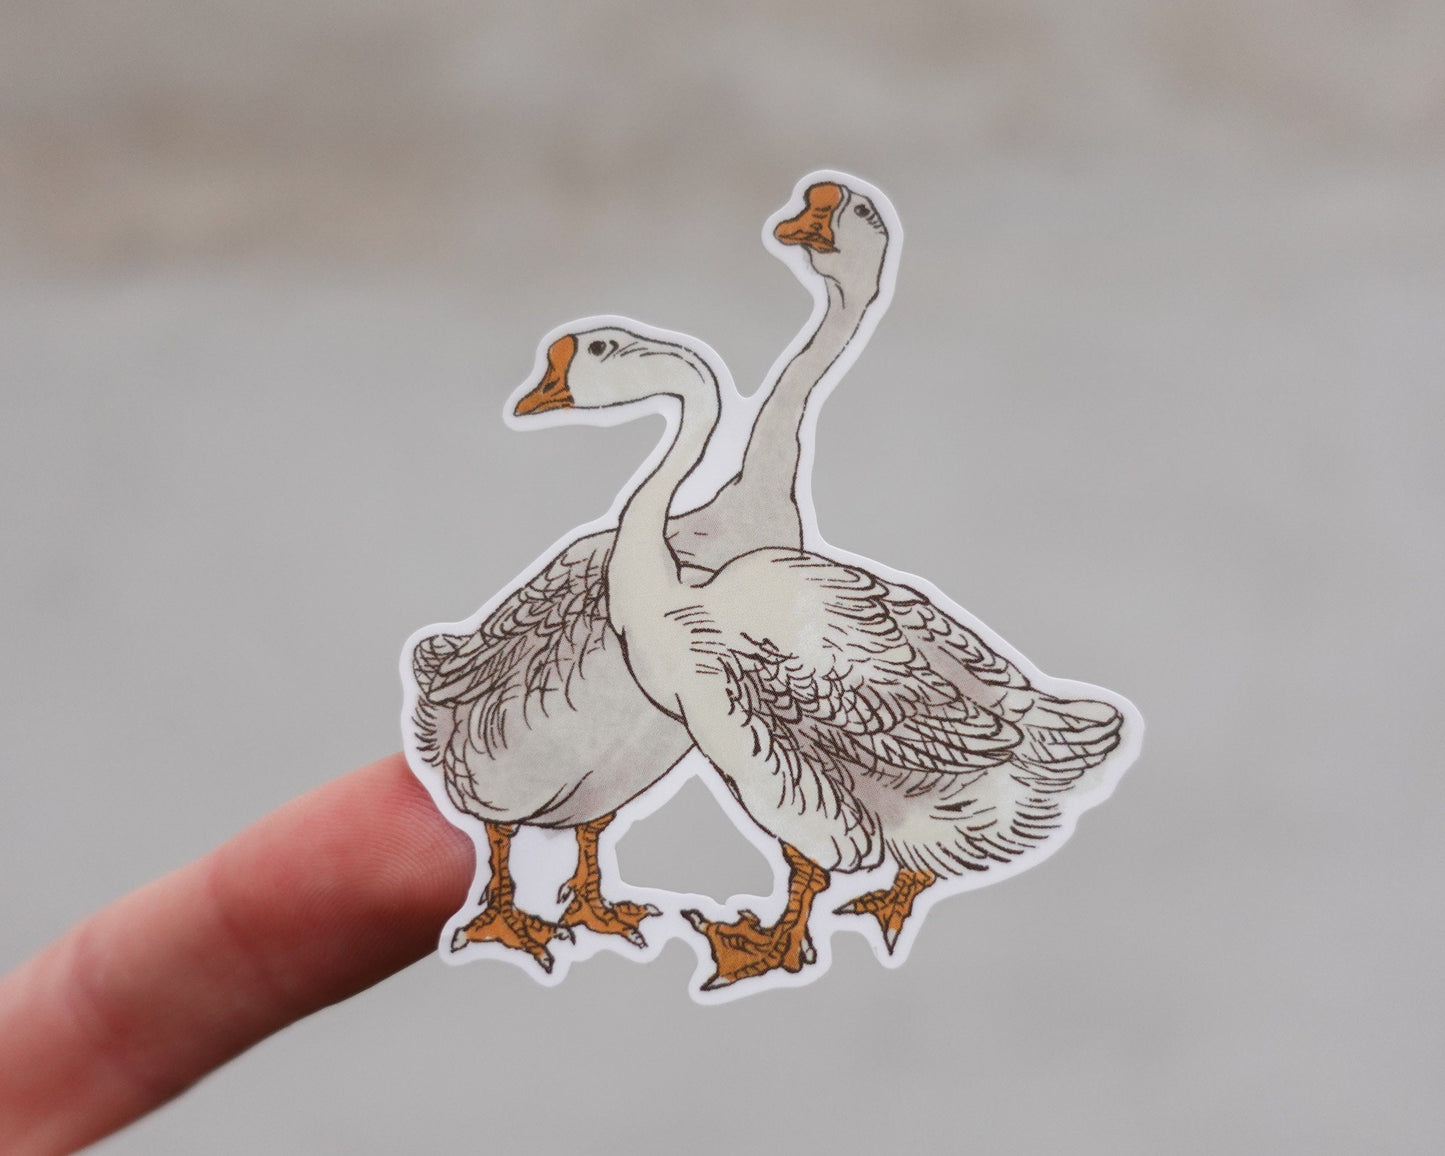 Geese and Flowers – Stickersheet with 9 Japanese Stickers inspired by Kono Bairei Ukiyo-e